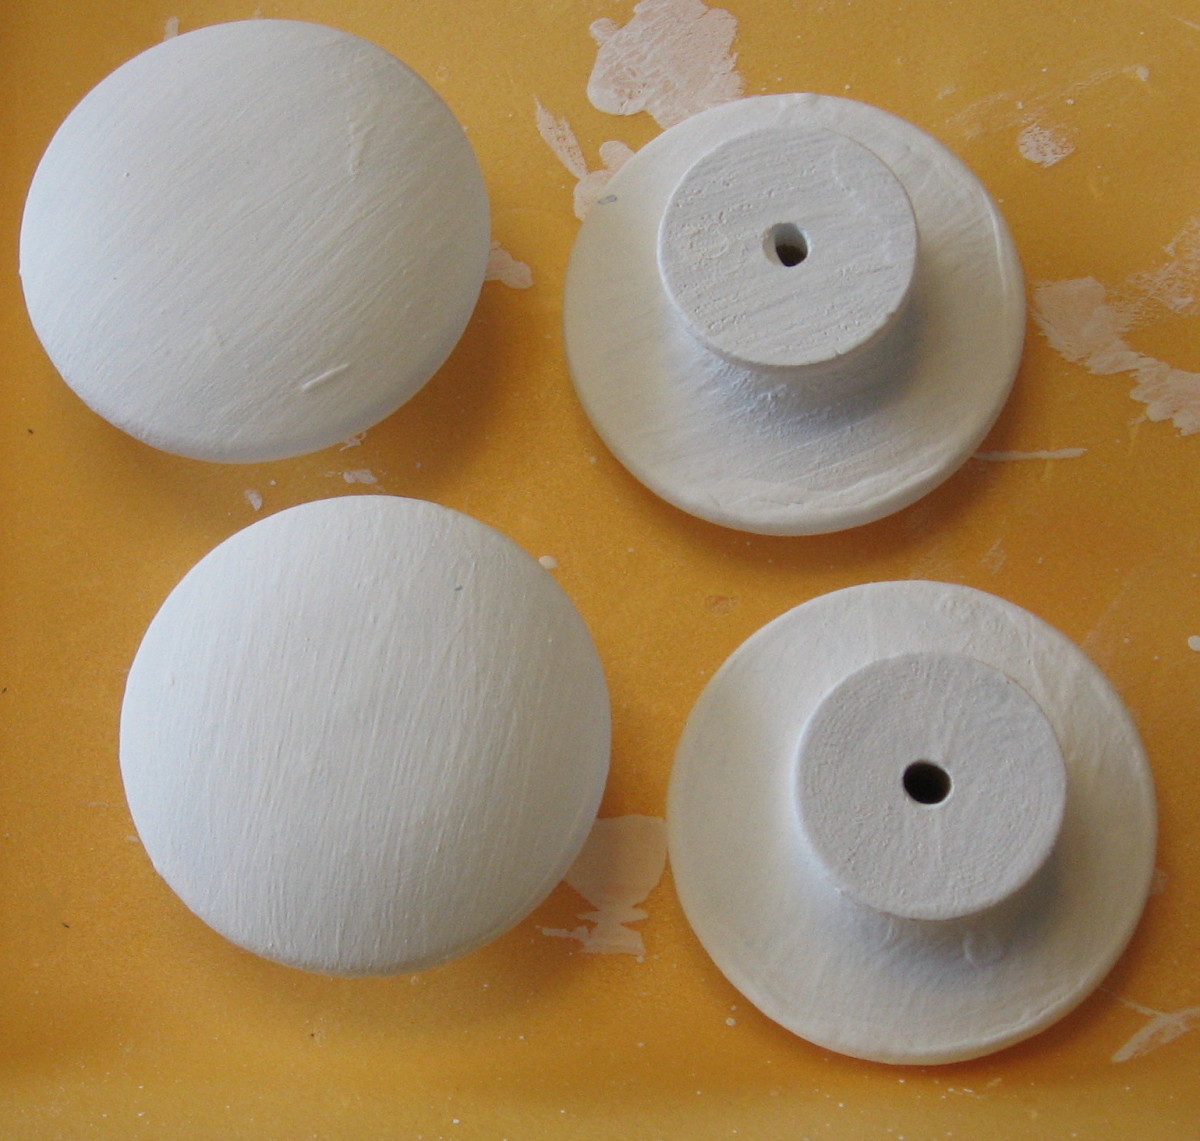 Knobs look smooth, clean and opaque. 